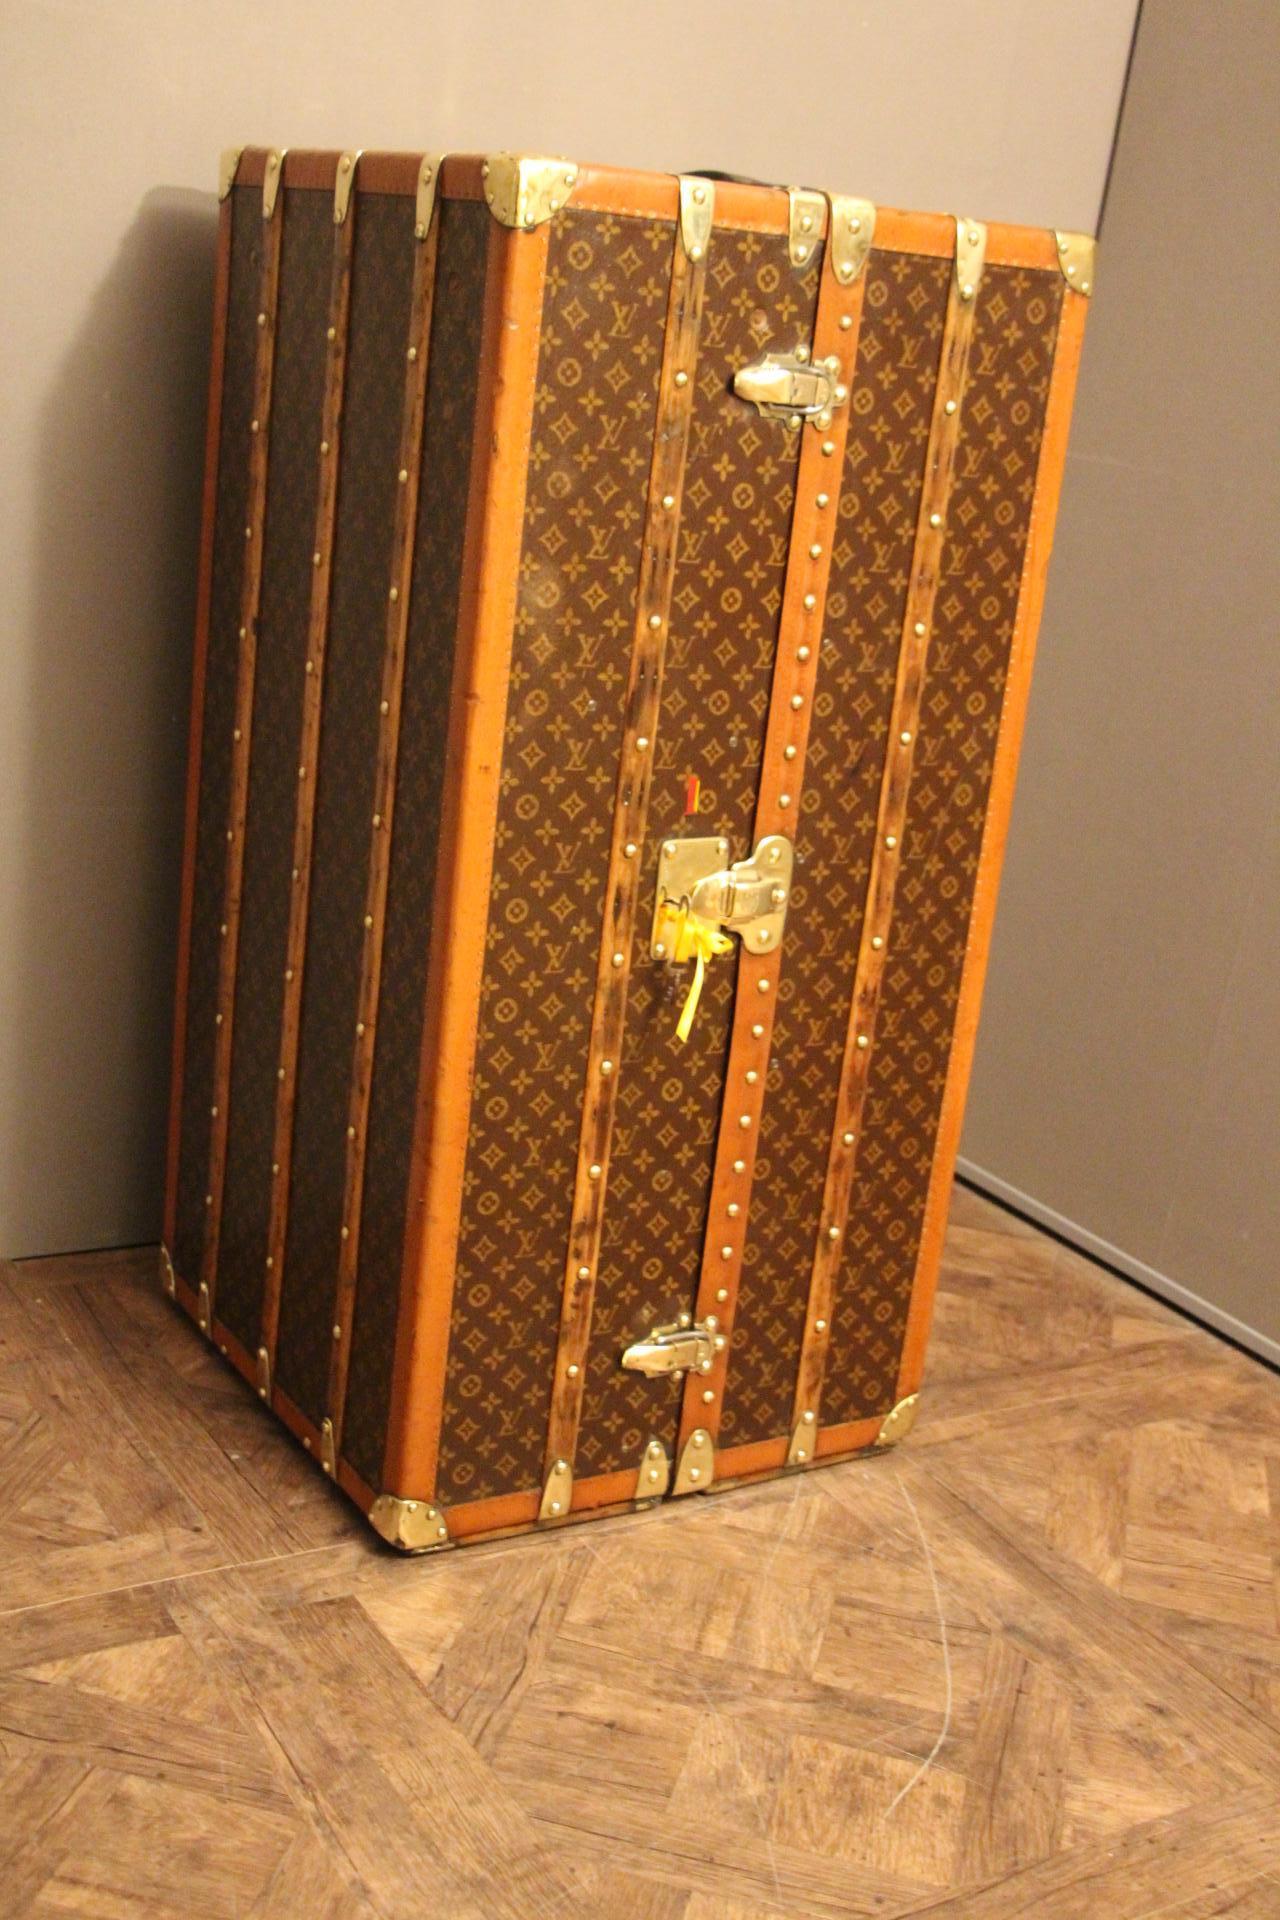 This beautiful wardrobe steamer trunk from Louis Vuitton features stencilled monogram canvas, leather top handle, solid LV engraved brass locks, solid brass corners and all LV stamped studs. All original leather handles. Very warm patina.
Locking